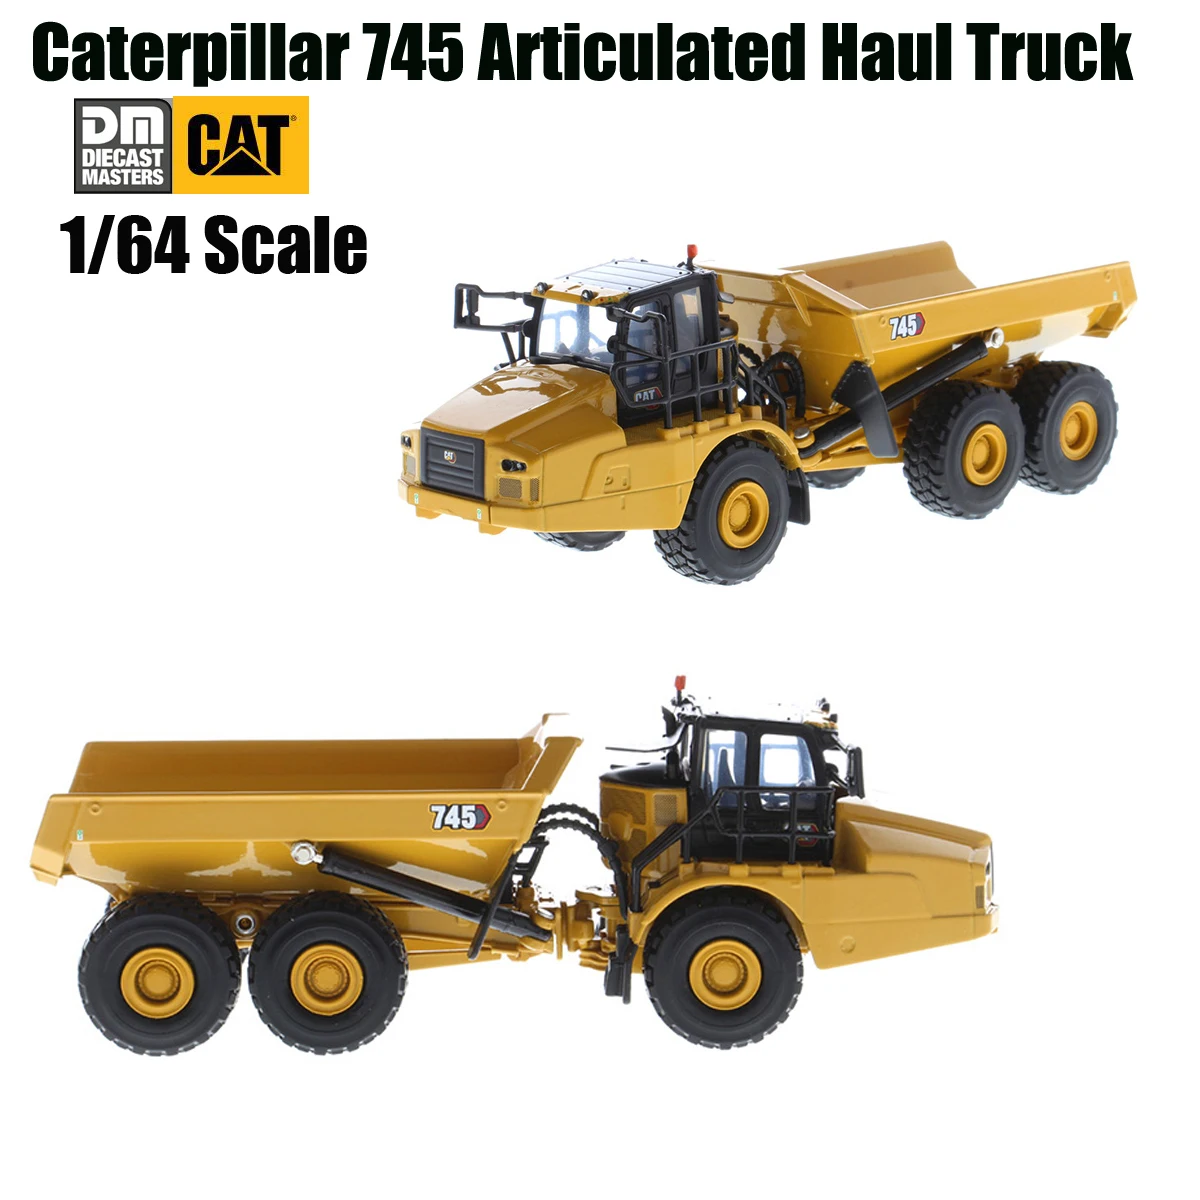 DM   1/64 Scale CAT 745 Articulated Haul Truck by DM Diecast Master #85639